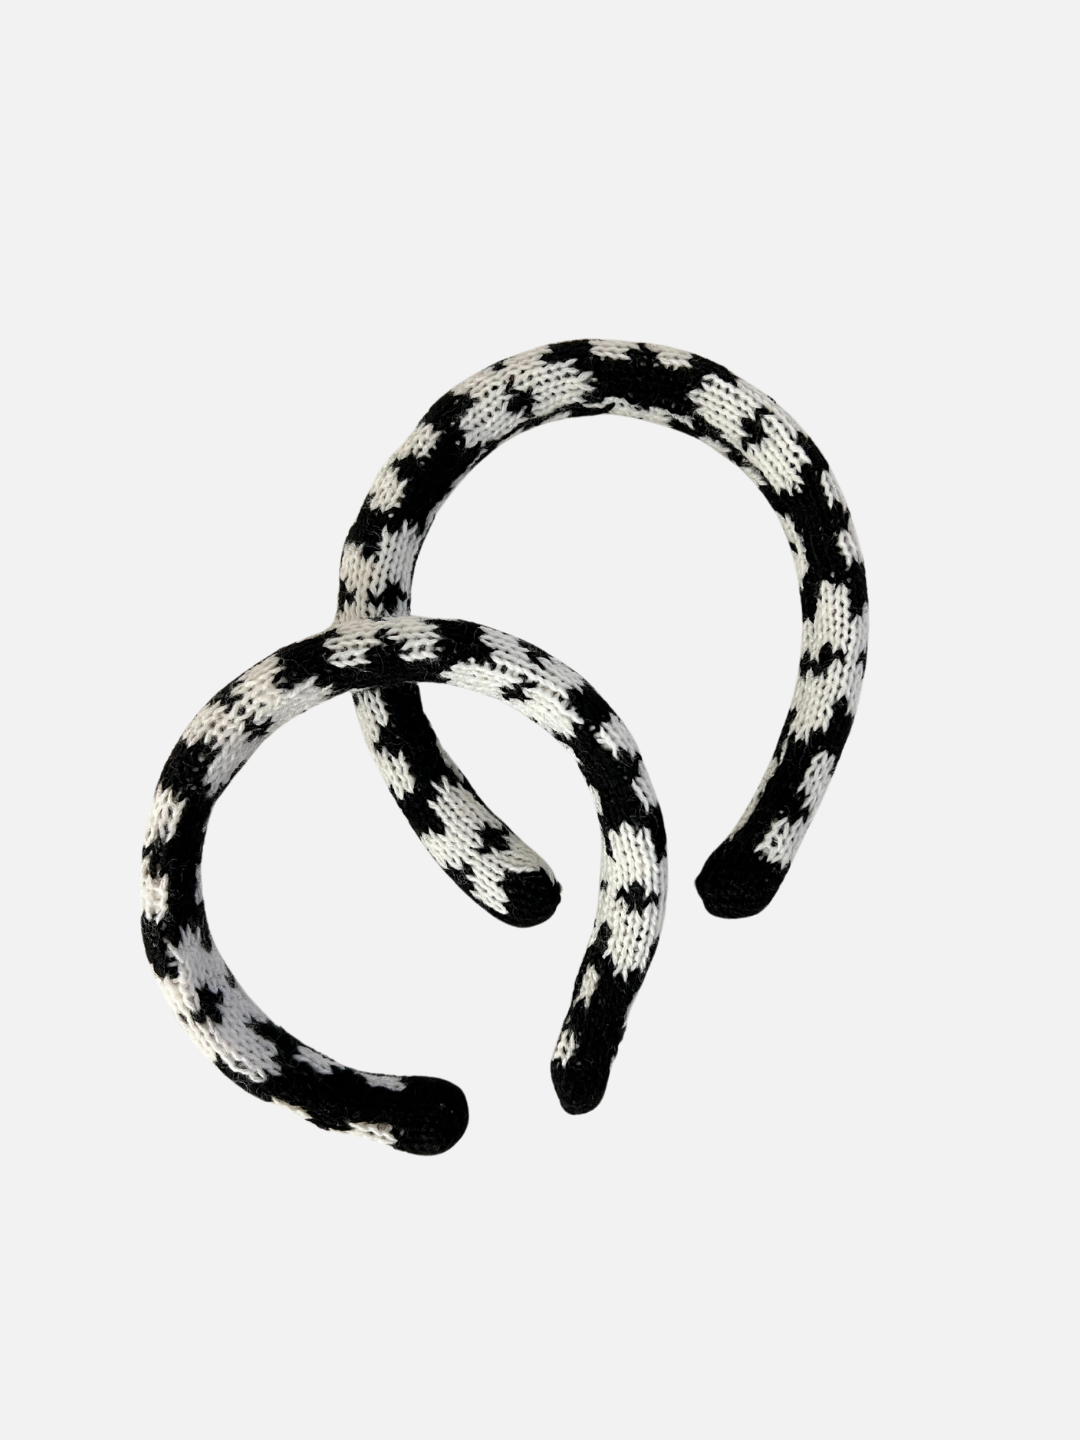 Two sizes of kids' knitted headband in pattern of white flowers on a black background